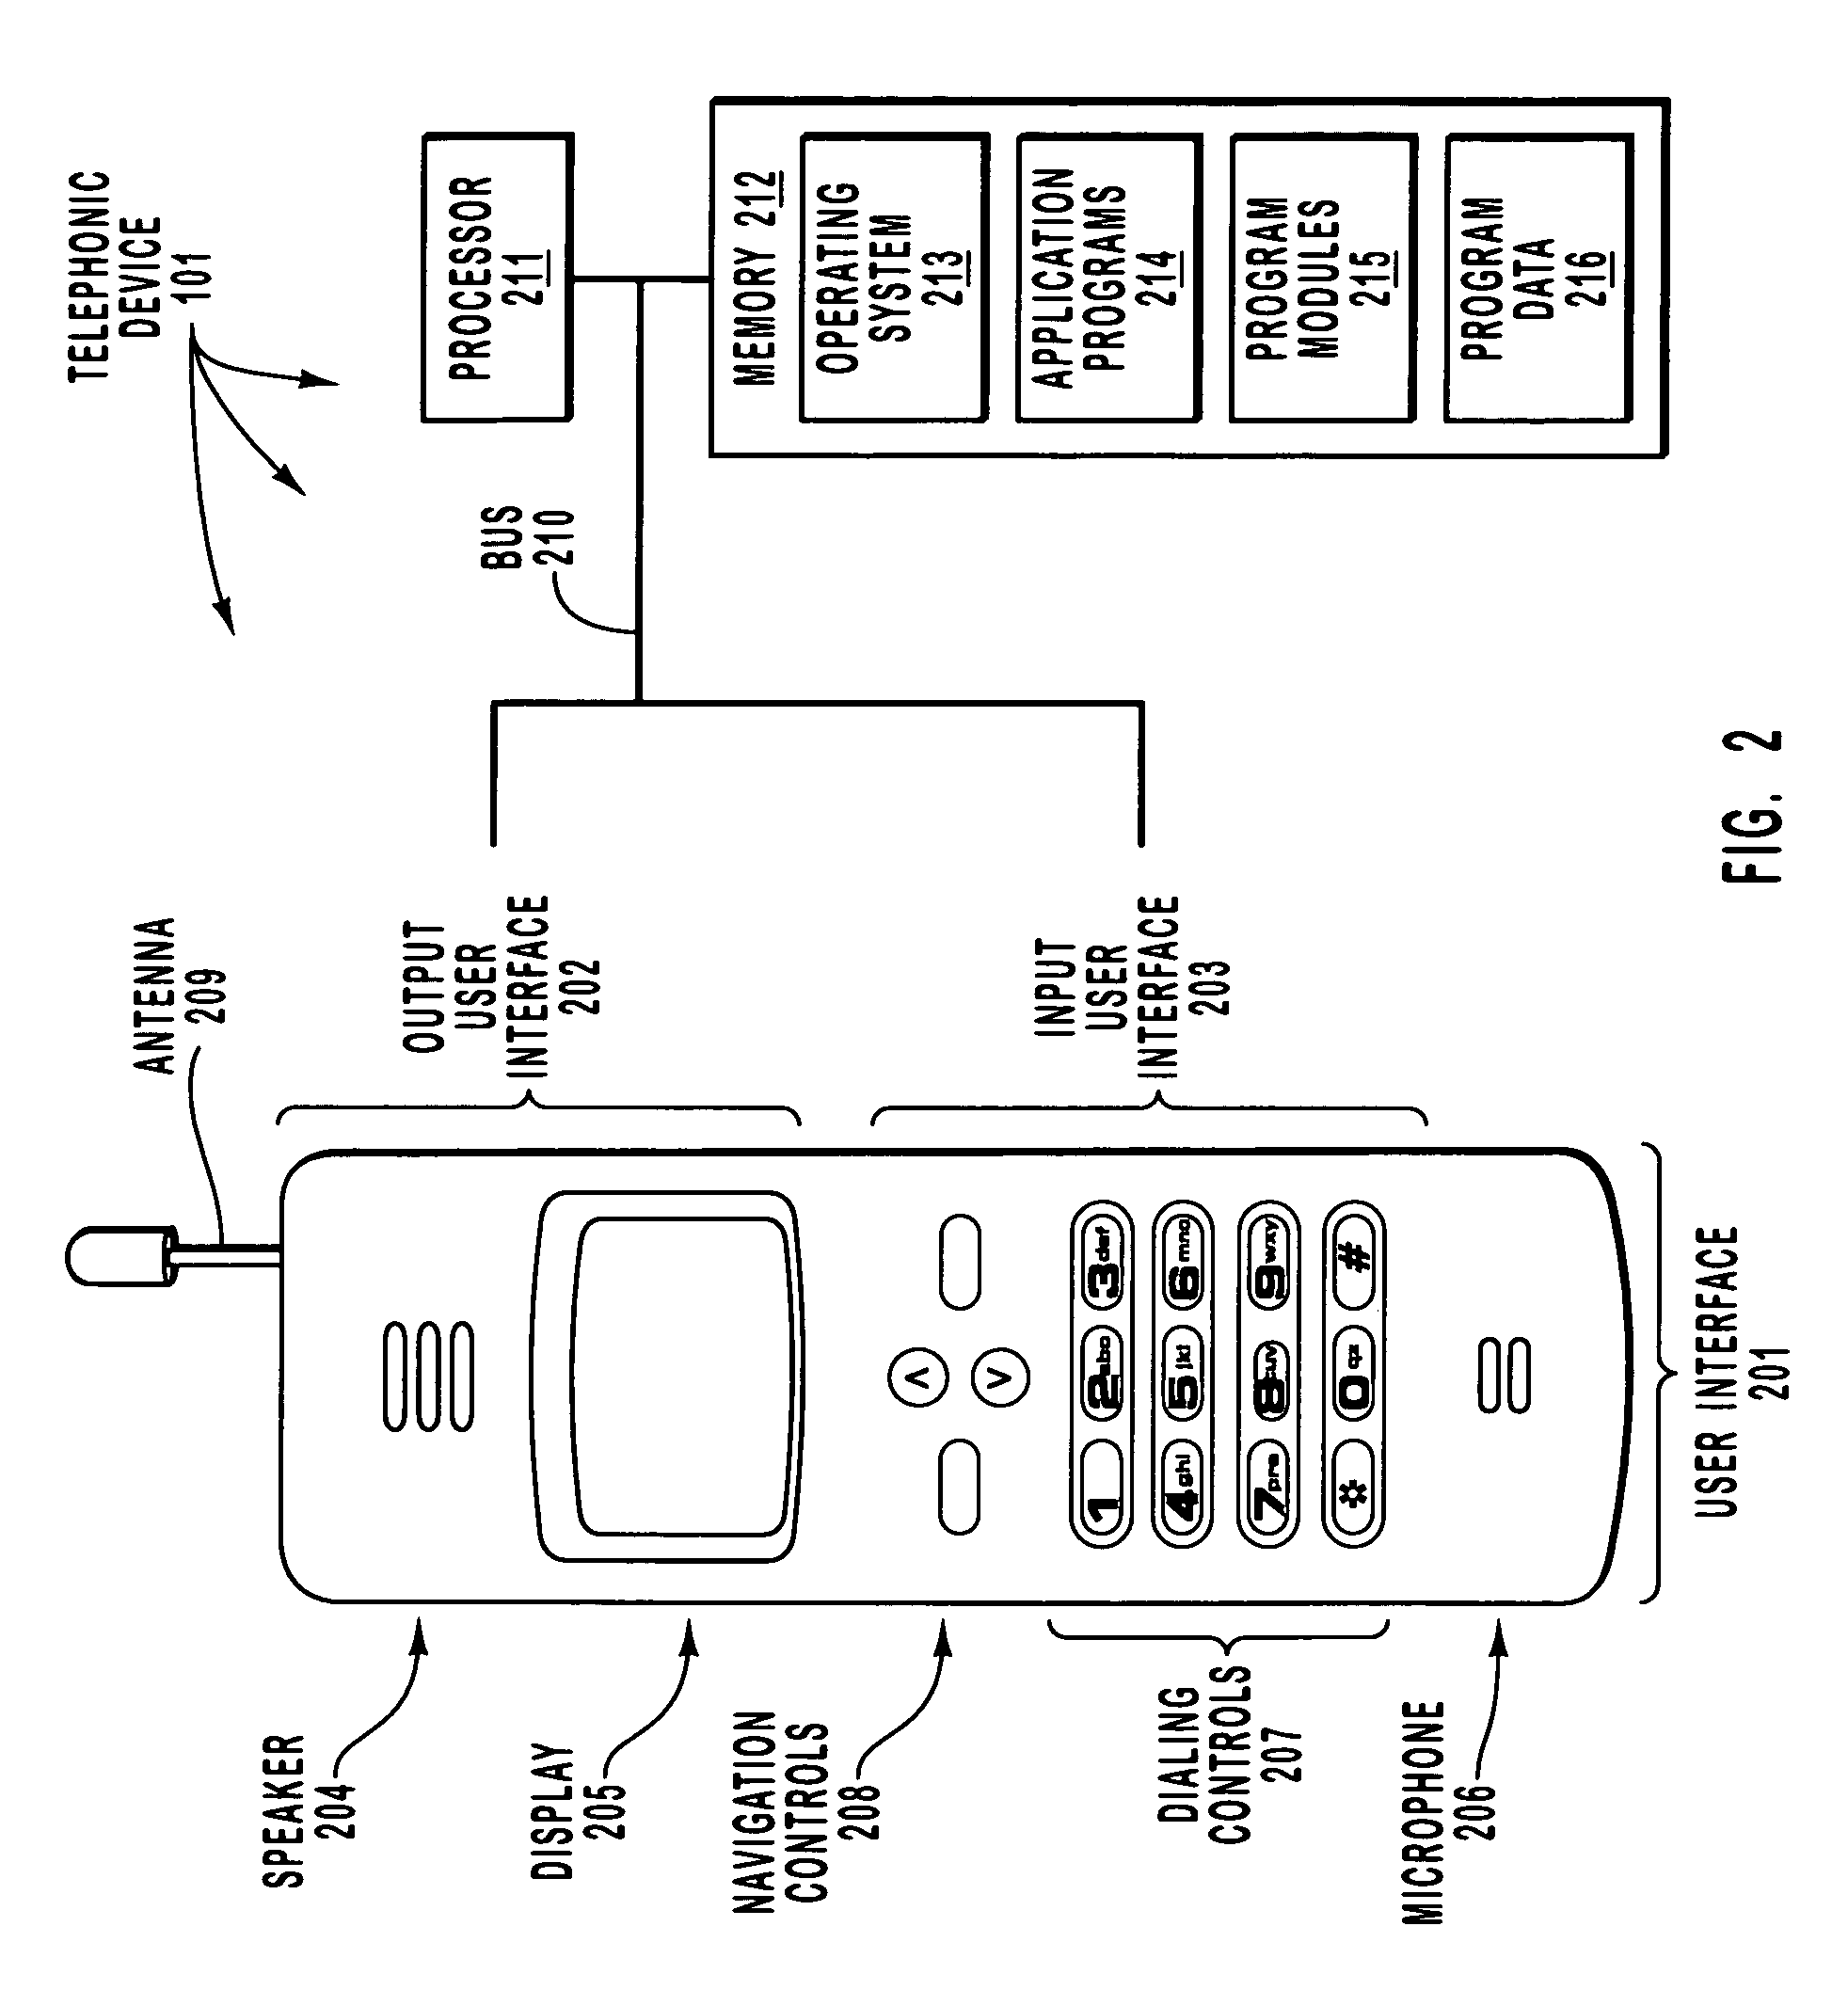 Communicating multi-part messages between cellular devices using a standardized interface